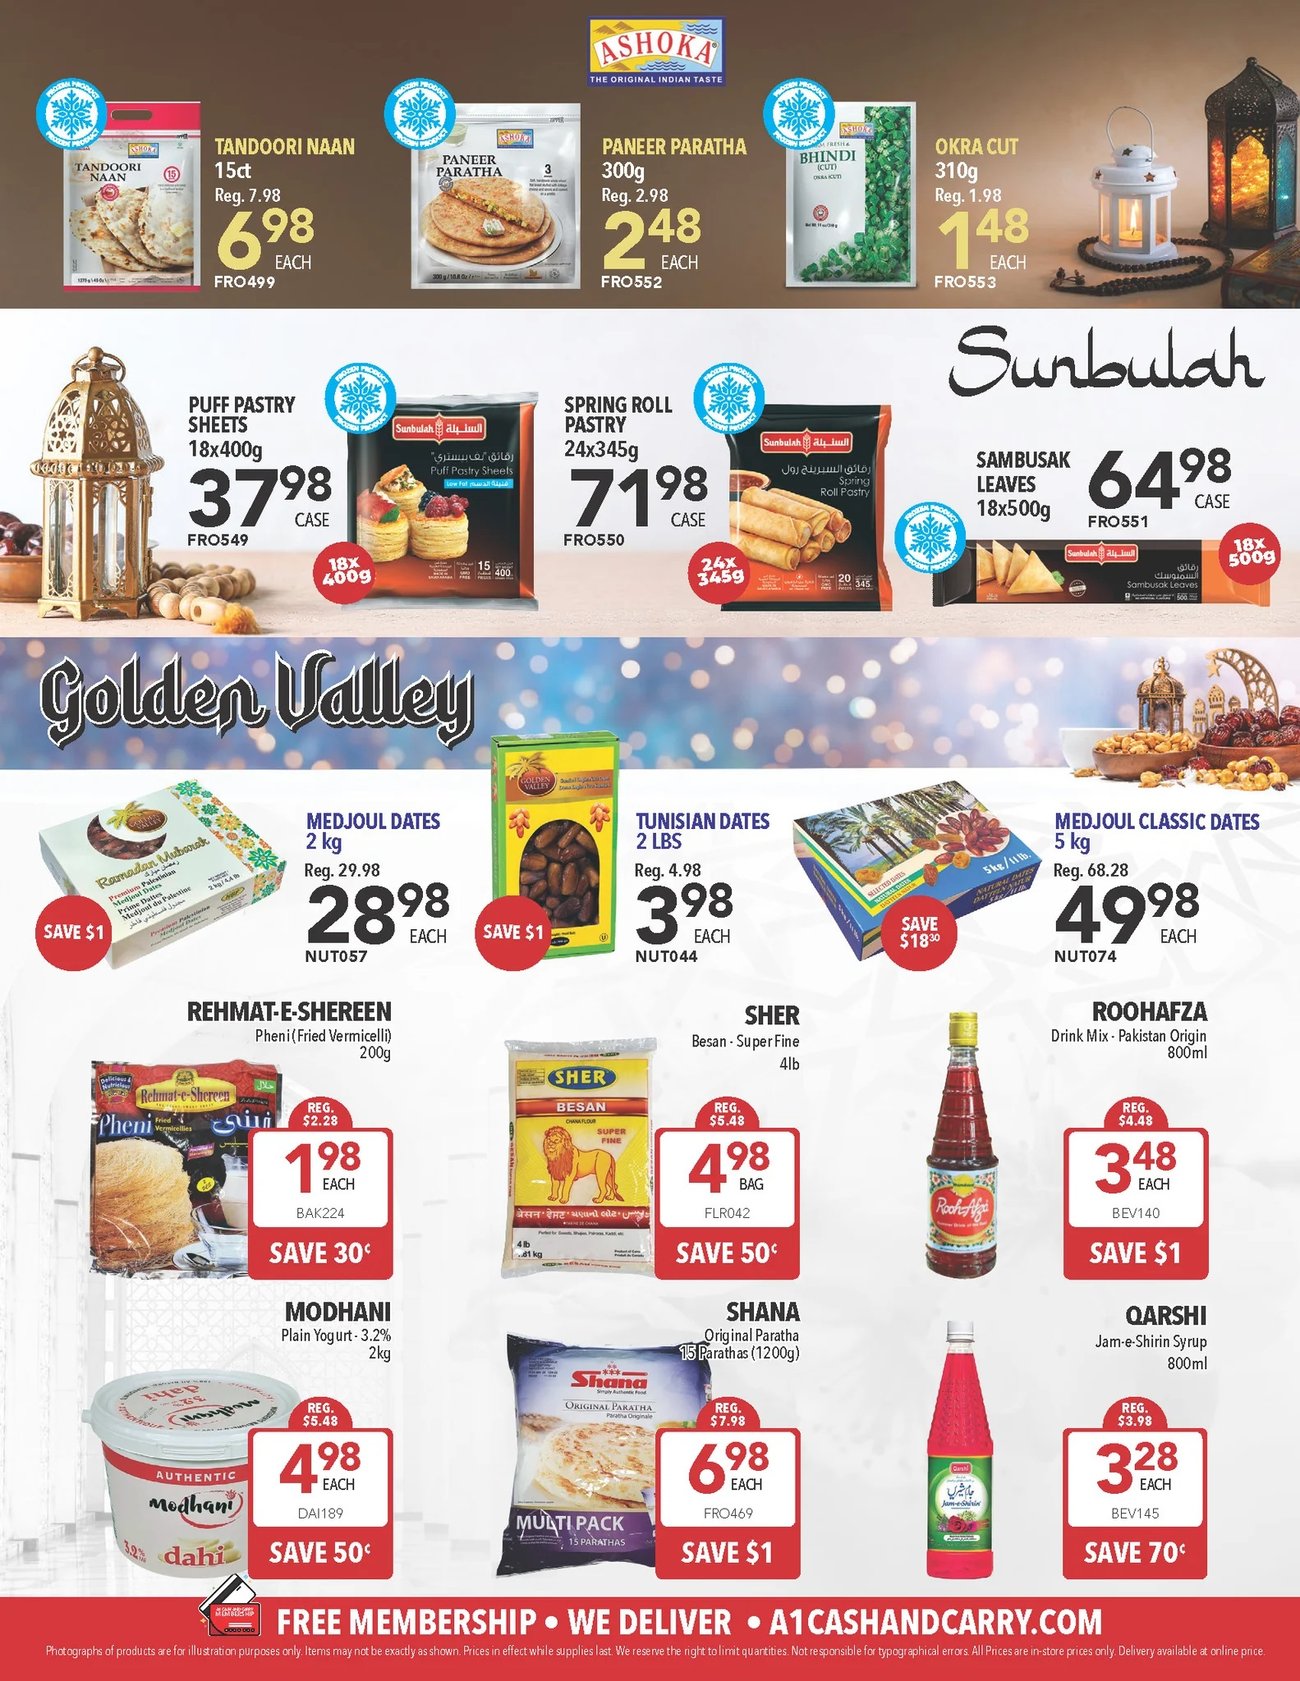 A1 Cash & Carry - Flyer Specials - Page 5